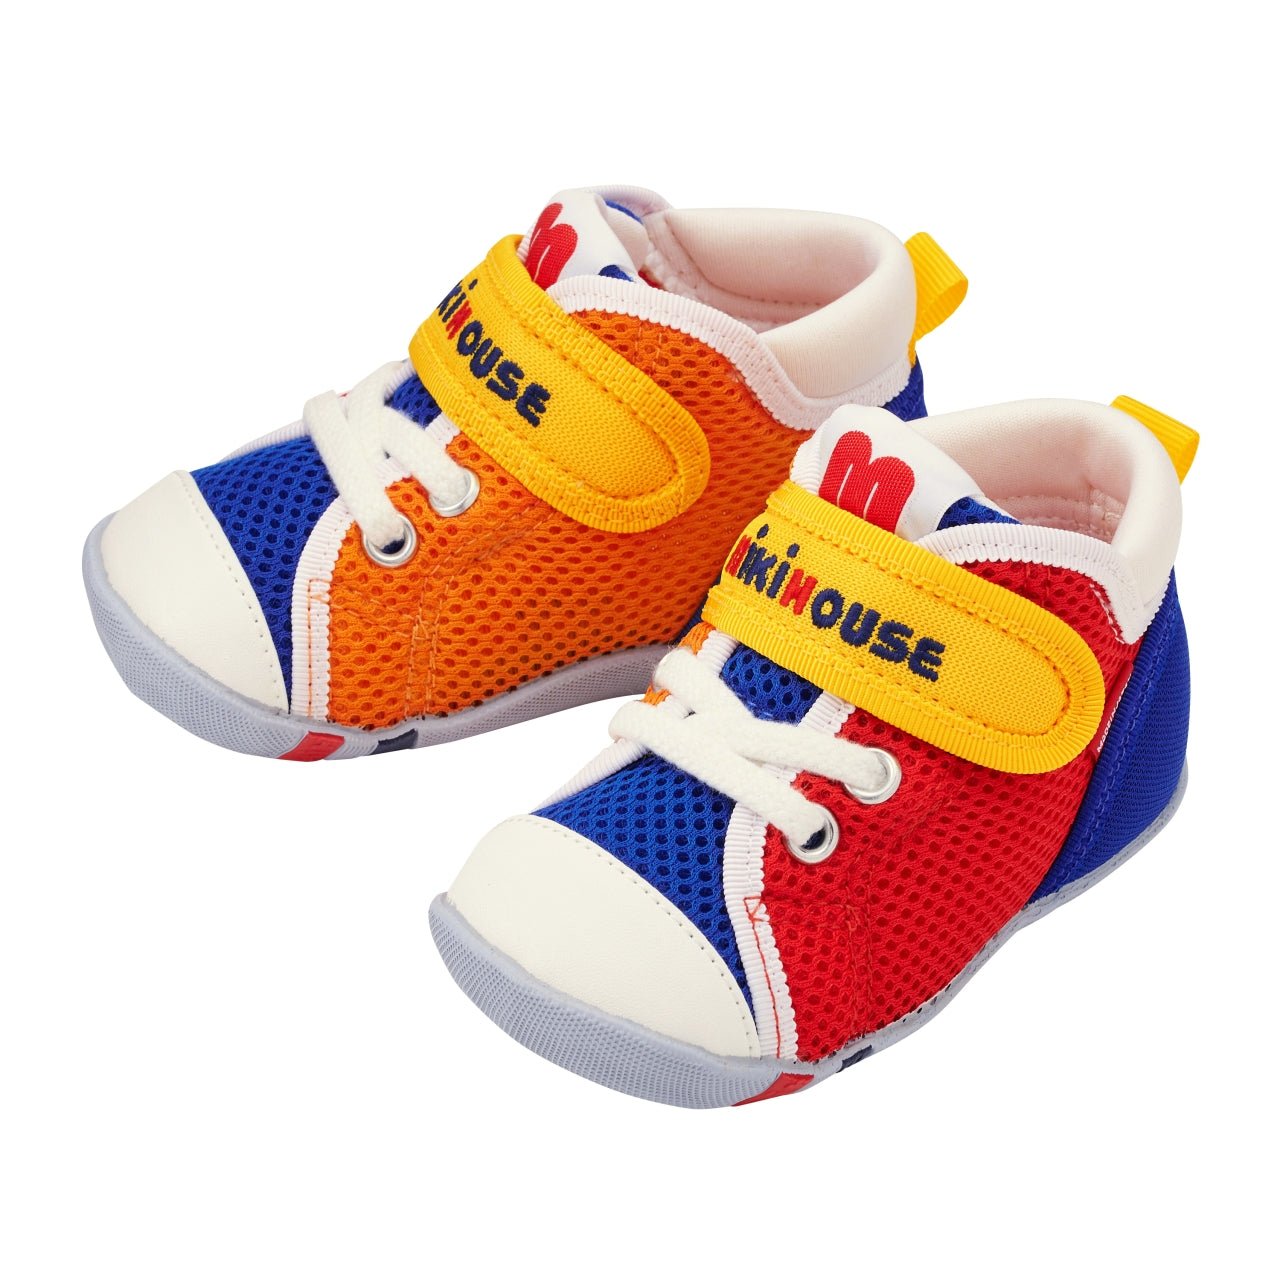 Double Russell Mesh First Walker Shoes - Blast from the Past - MIKI HOUSE USA